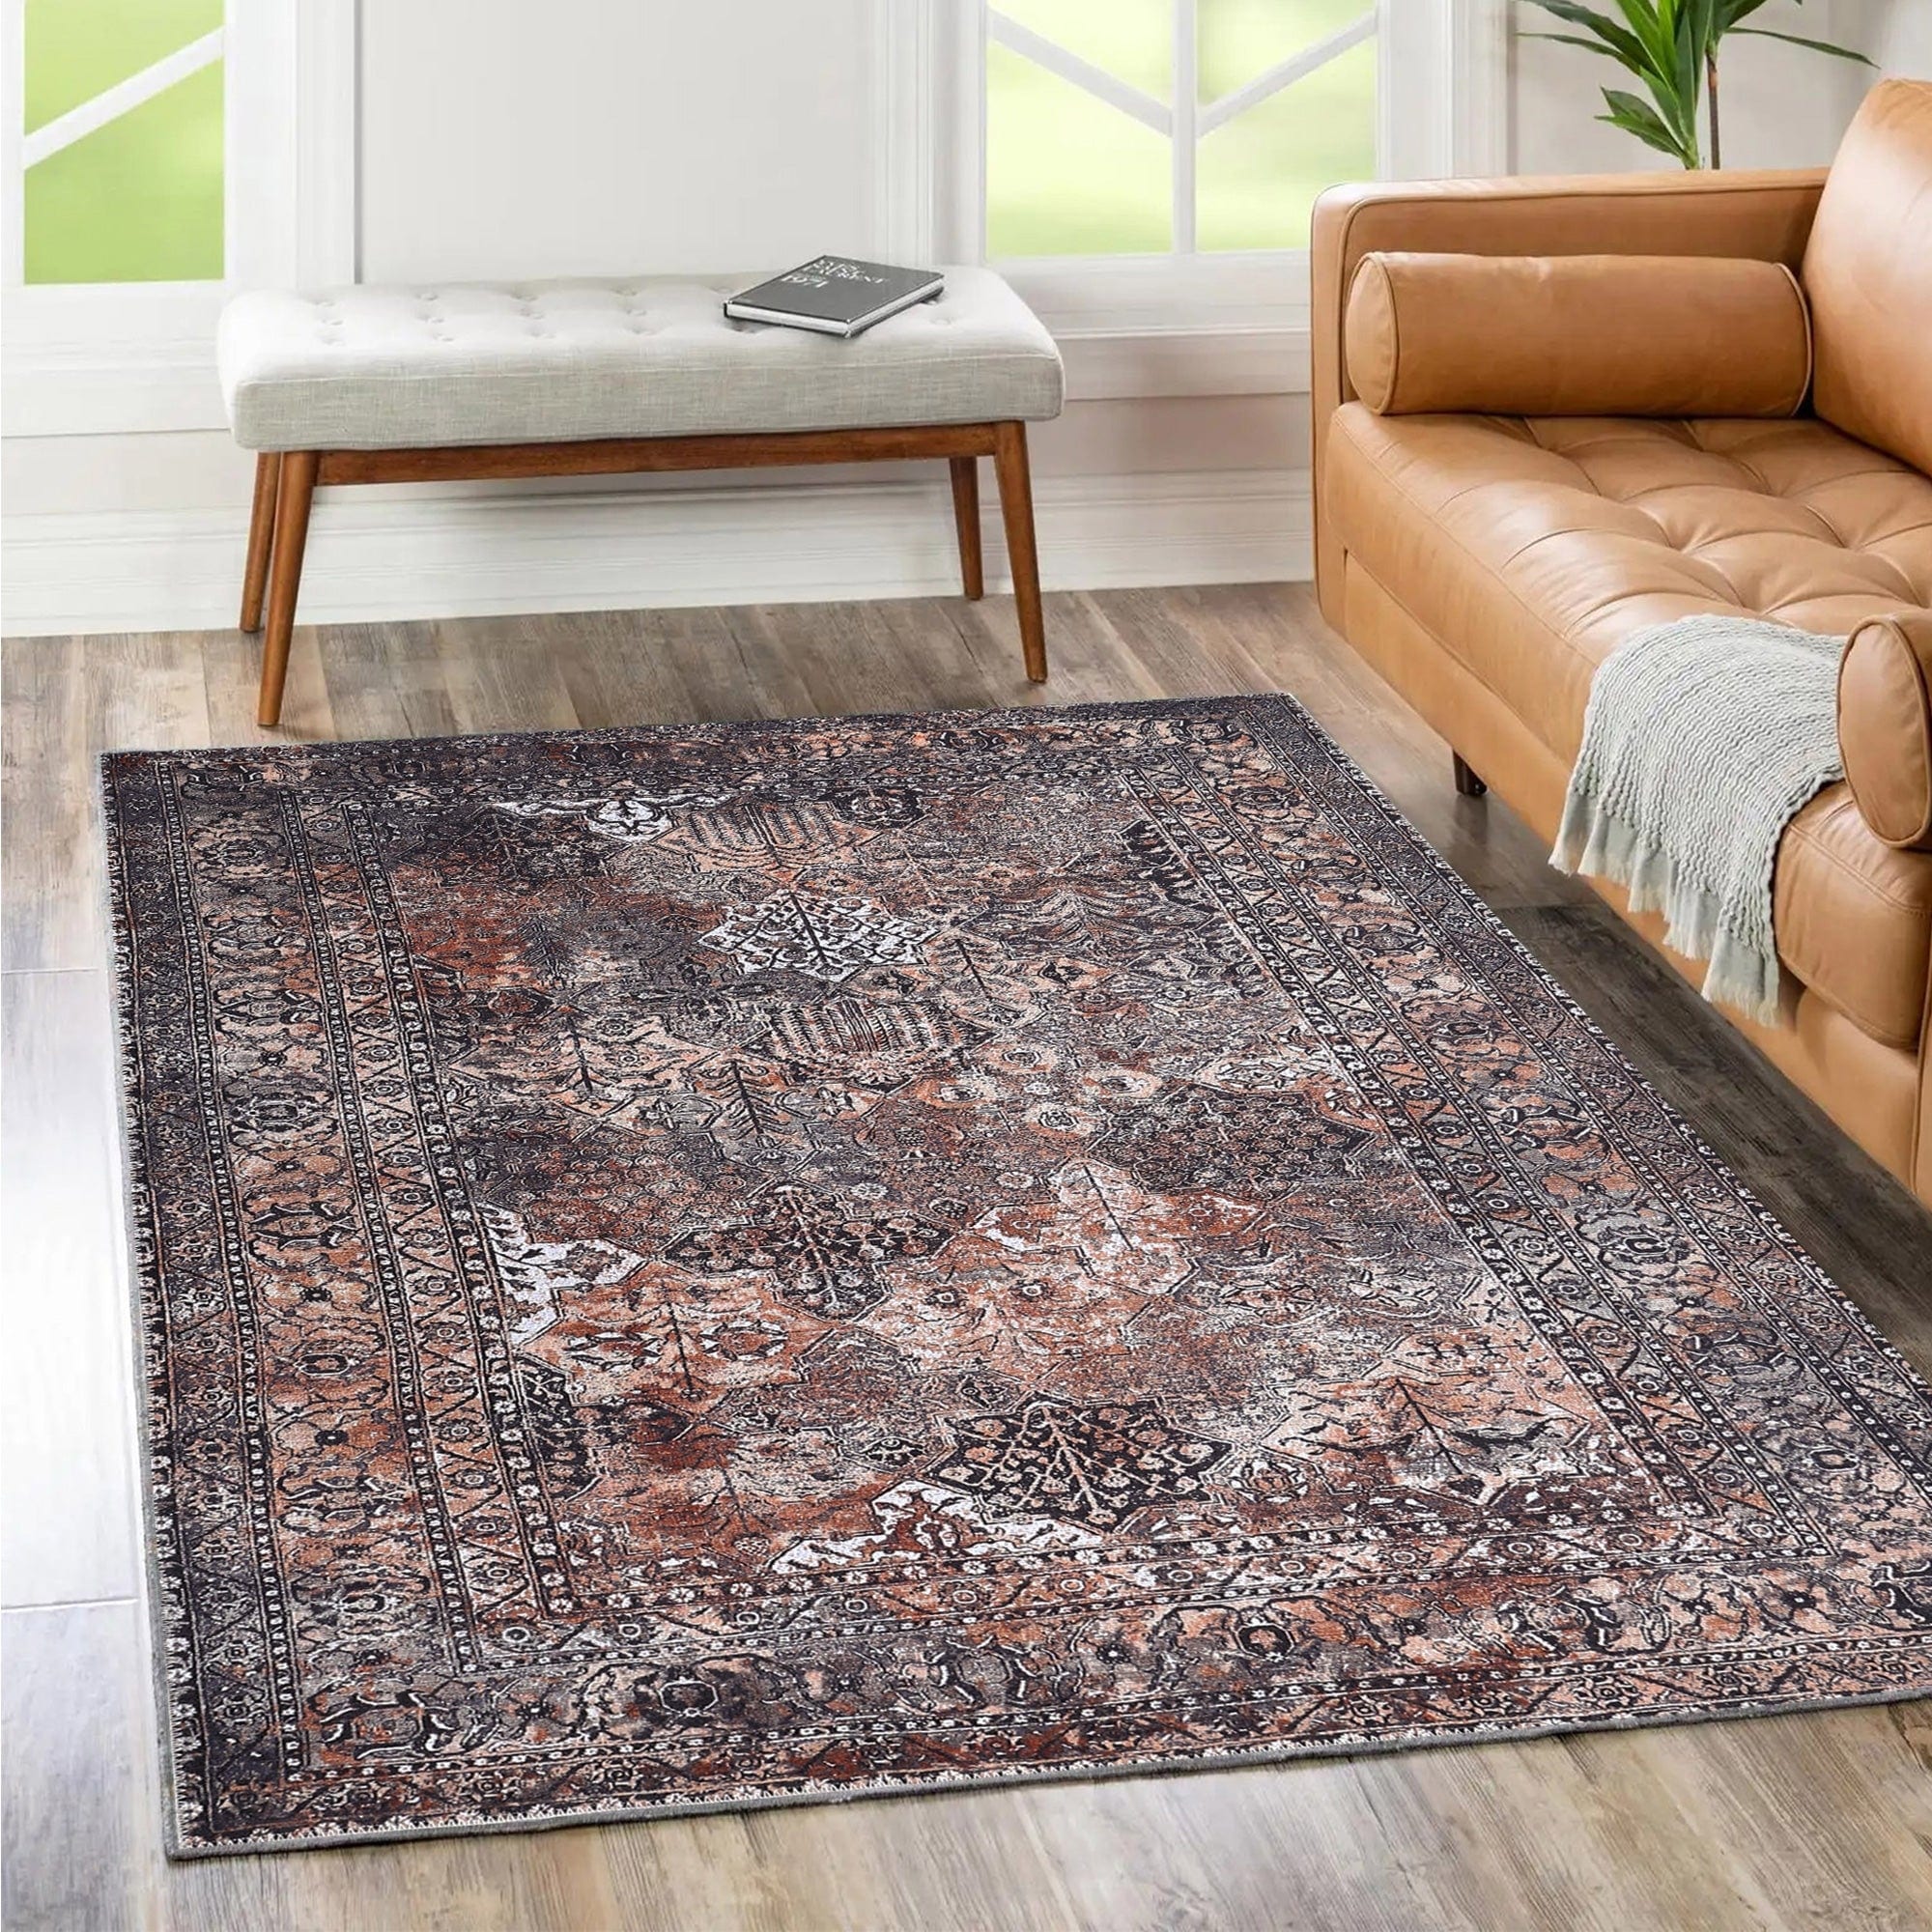 https://ak1.ostkcdn.com/images/products/is/images/direct/38ee9b2d34adcf6f8acea4e345769c4cb95ace87/The-Rug-Collective-Vintage-Tanner-Machine-Washable-Area-Rugs.jpg